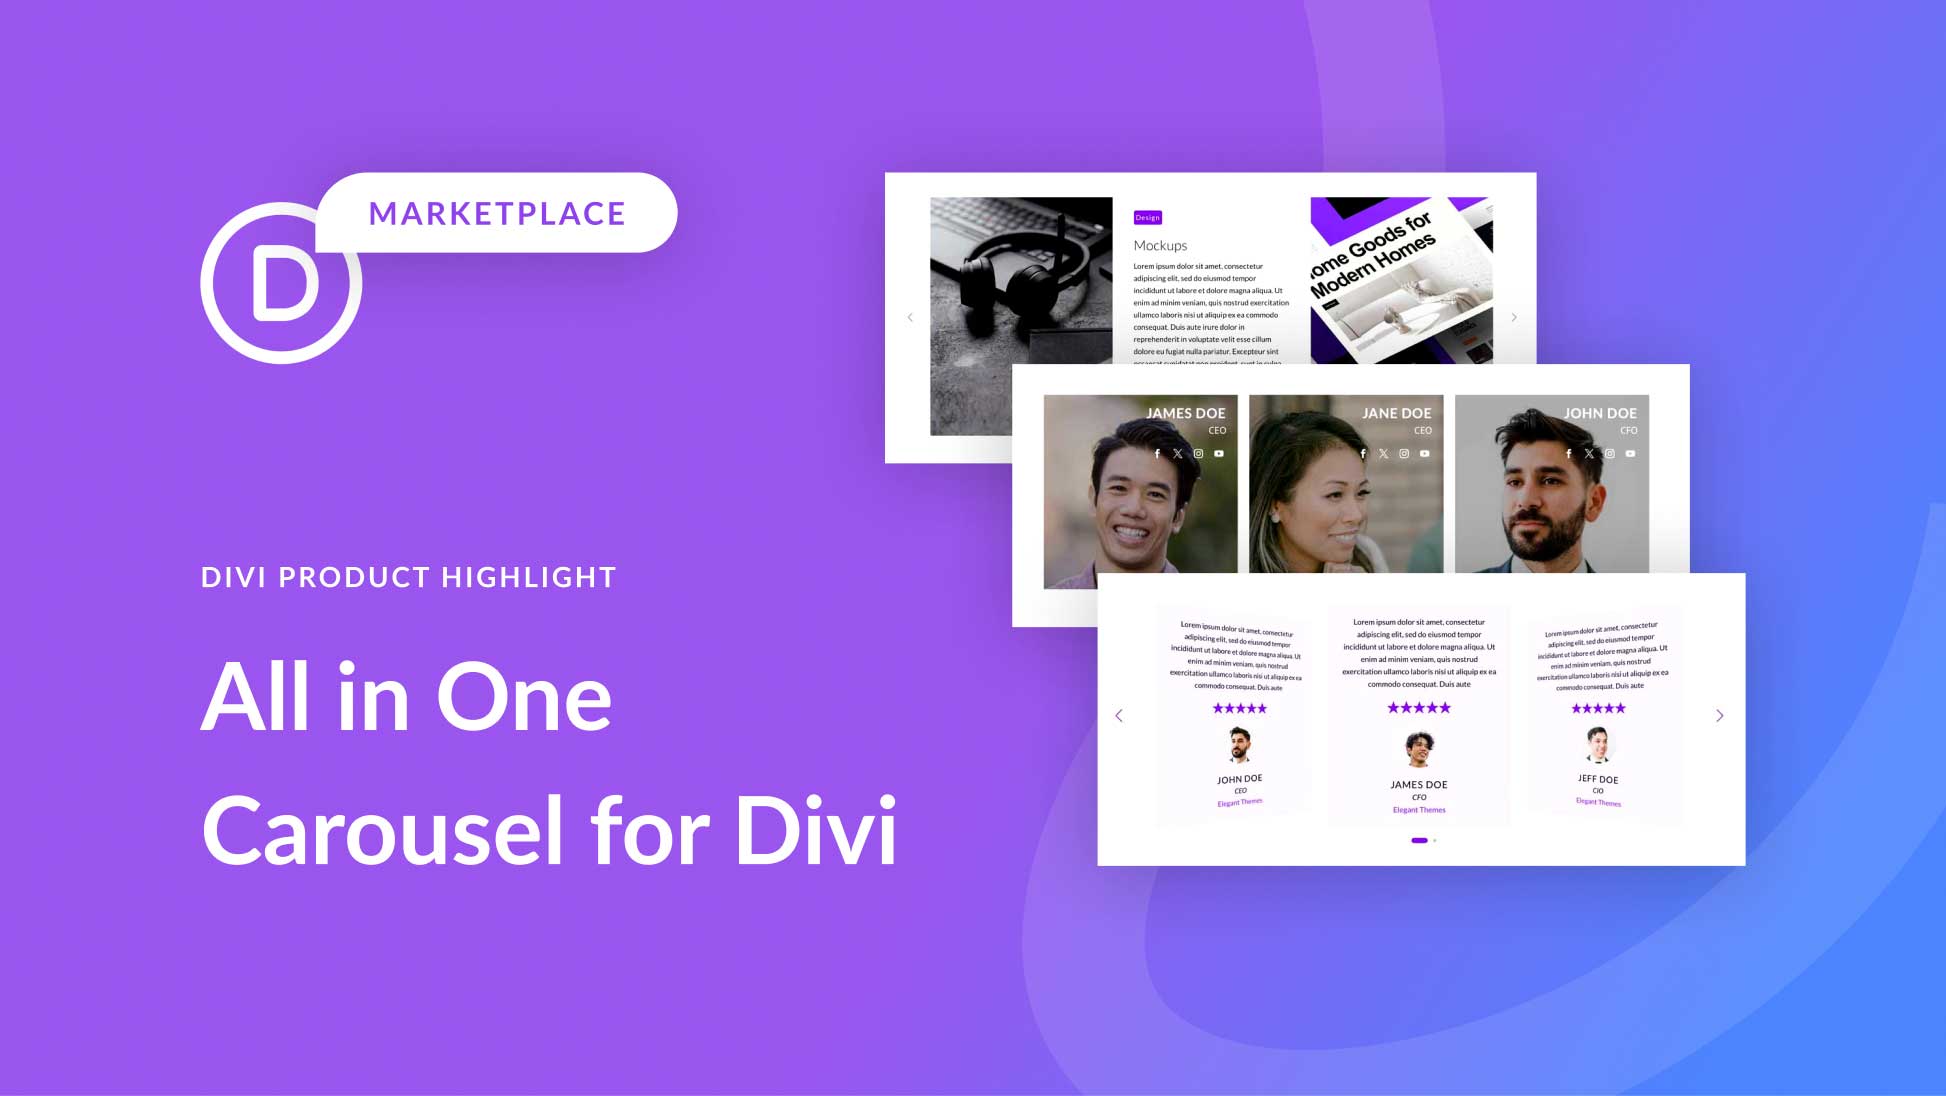 Divi Product Highlight: All in One Carousel for Divi